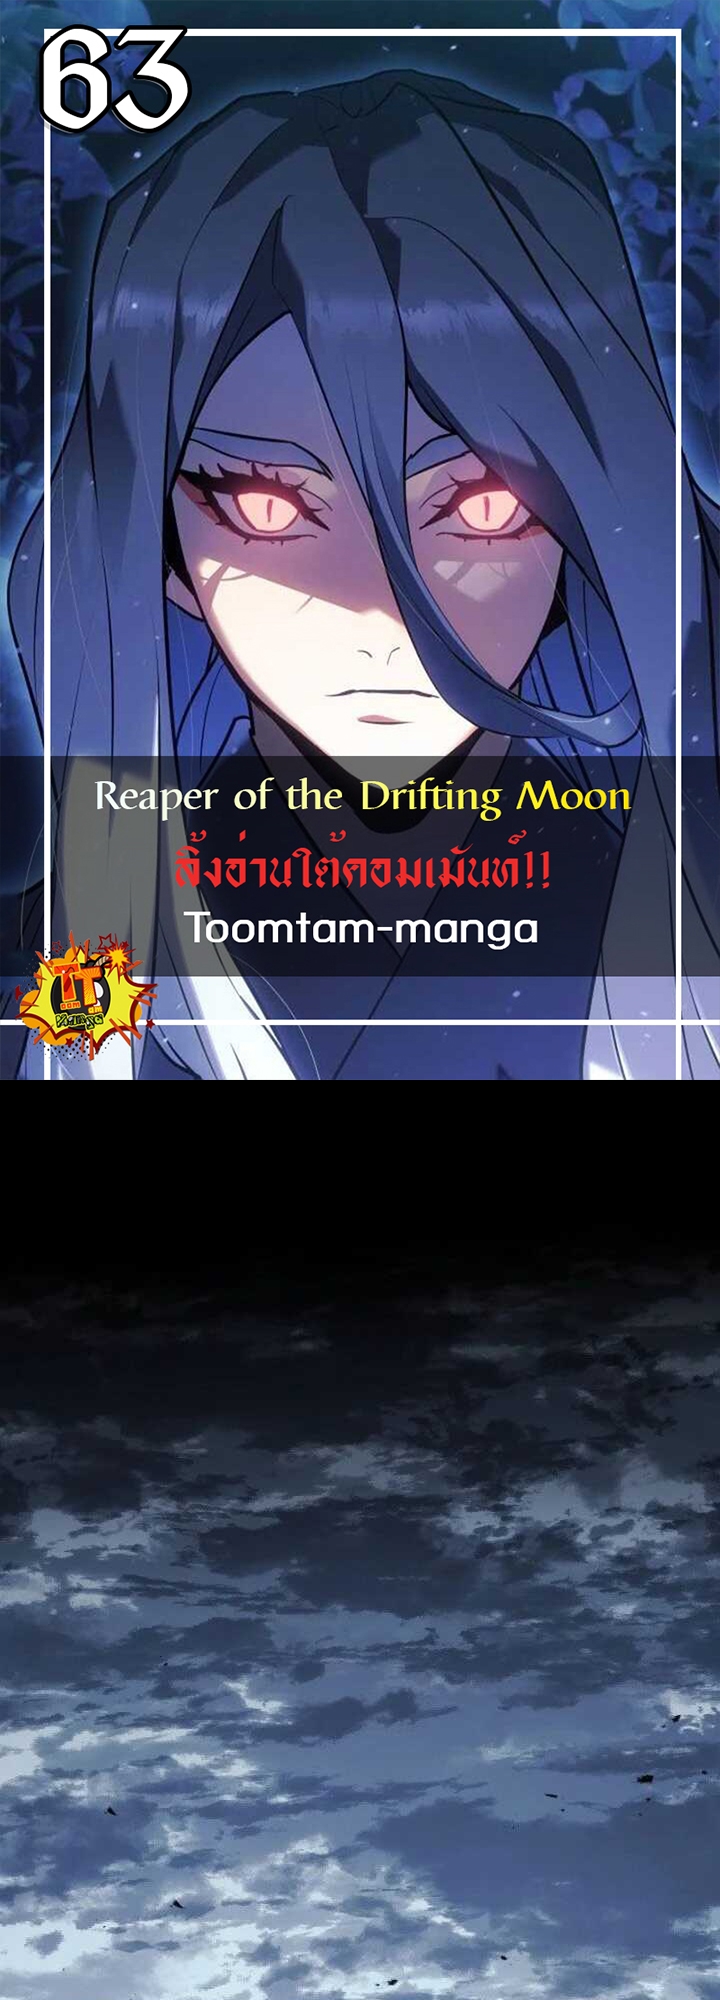 Reaper of the Drifting Moon 63 23 11 25660001